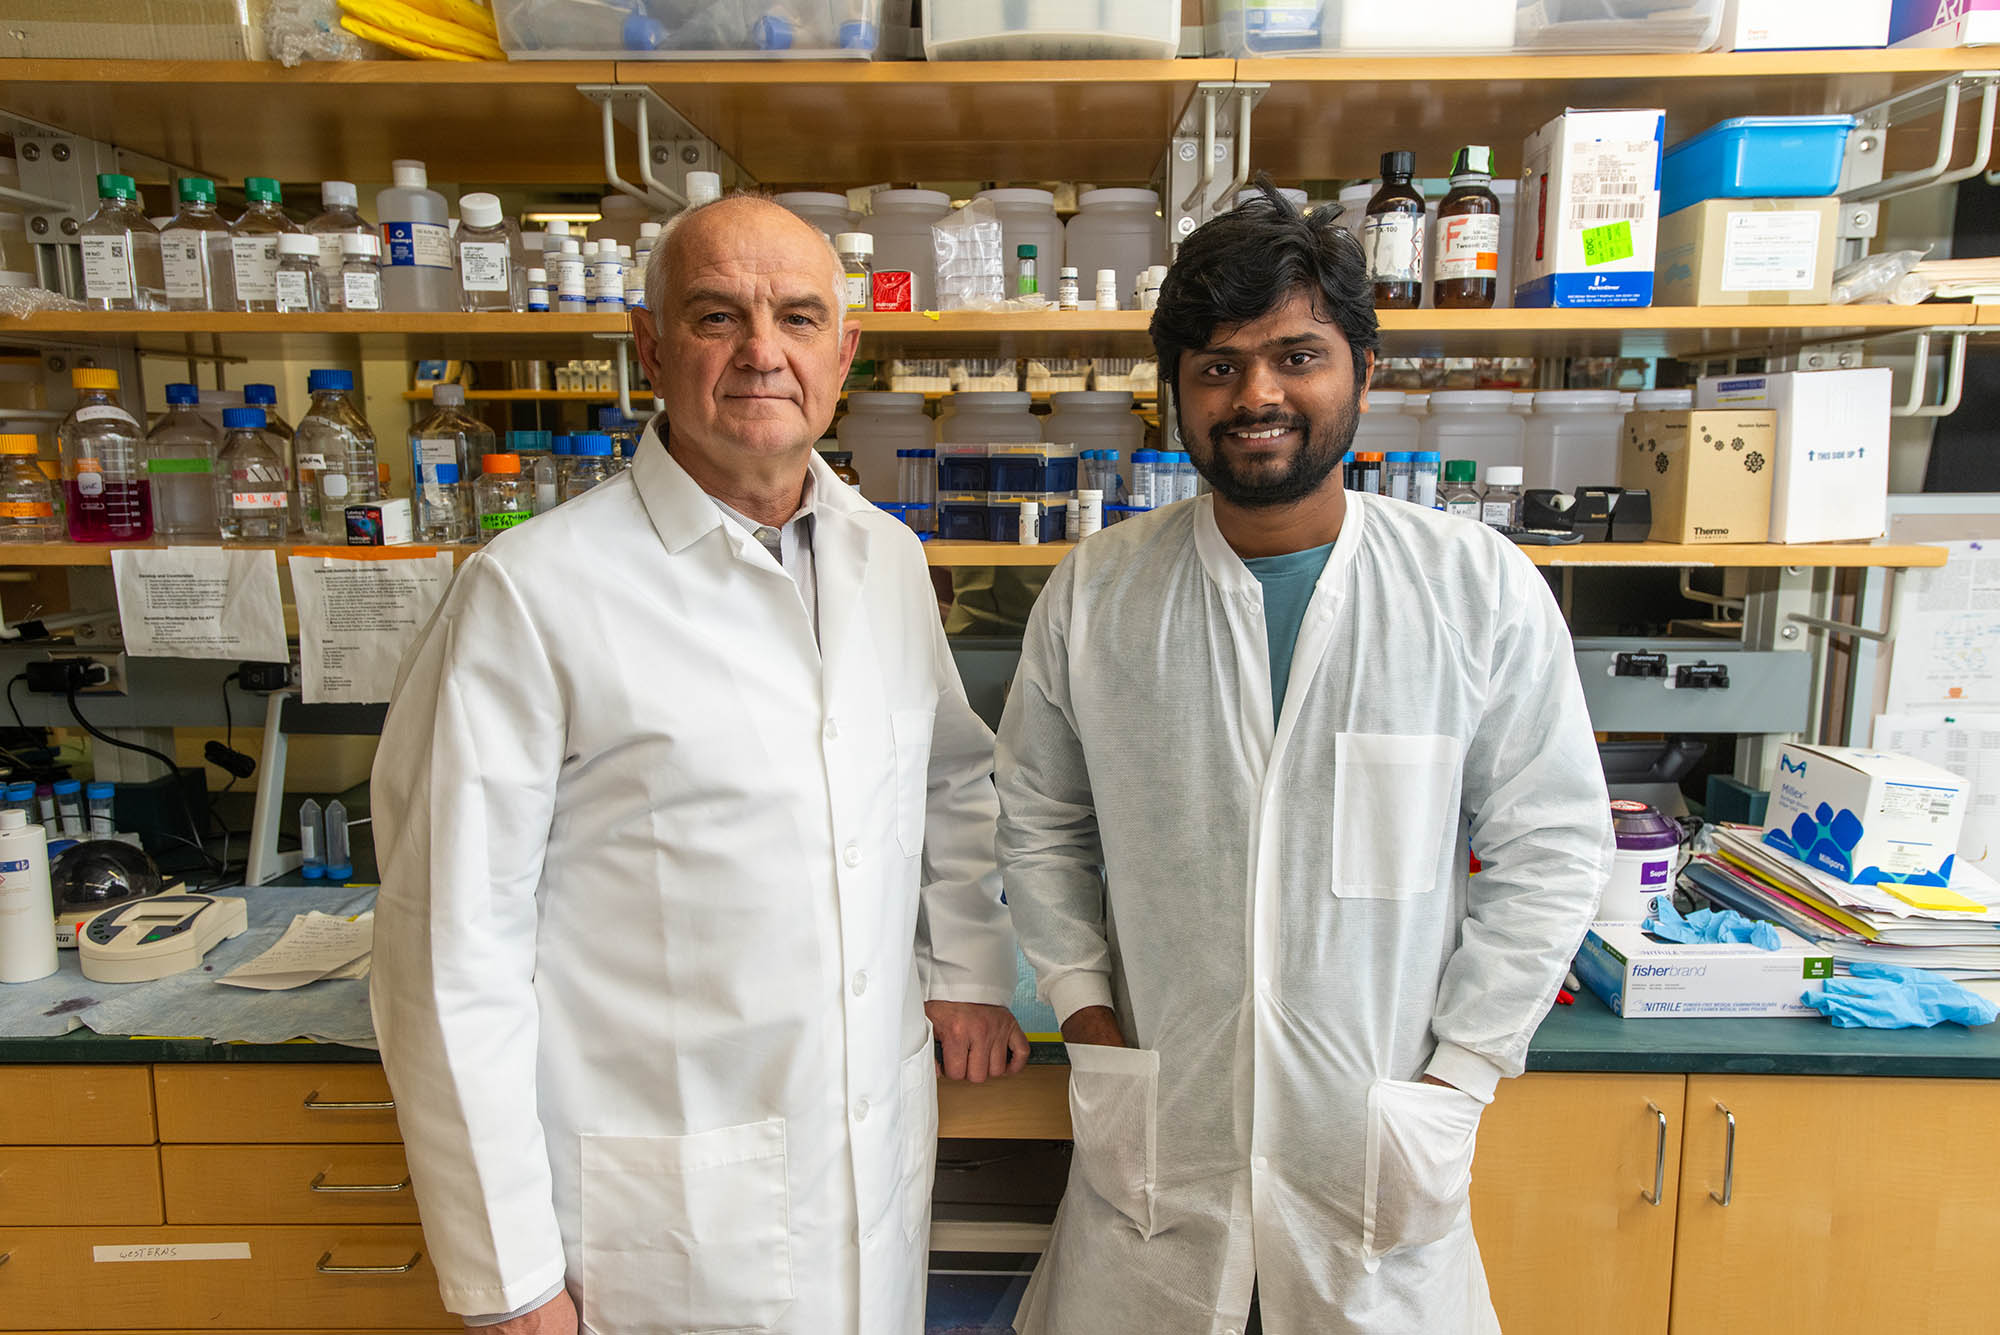 Photo: Igor Kramnik (left), an older white man wearing a white lab coat, and Shivraj Yabaji (right) a tan man with black hair and beard wearing a white lab coat, smile and pose in a science lab.